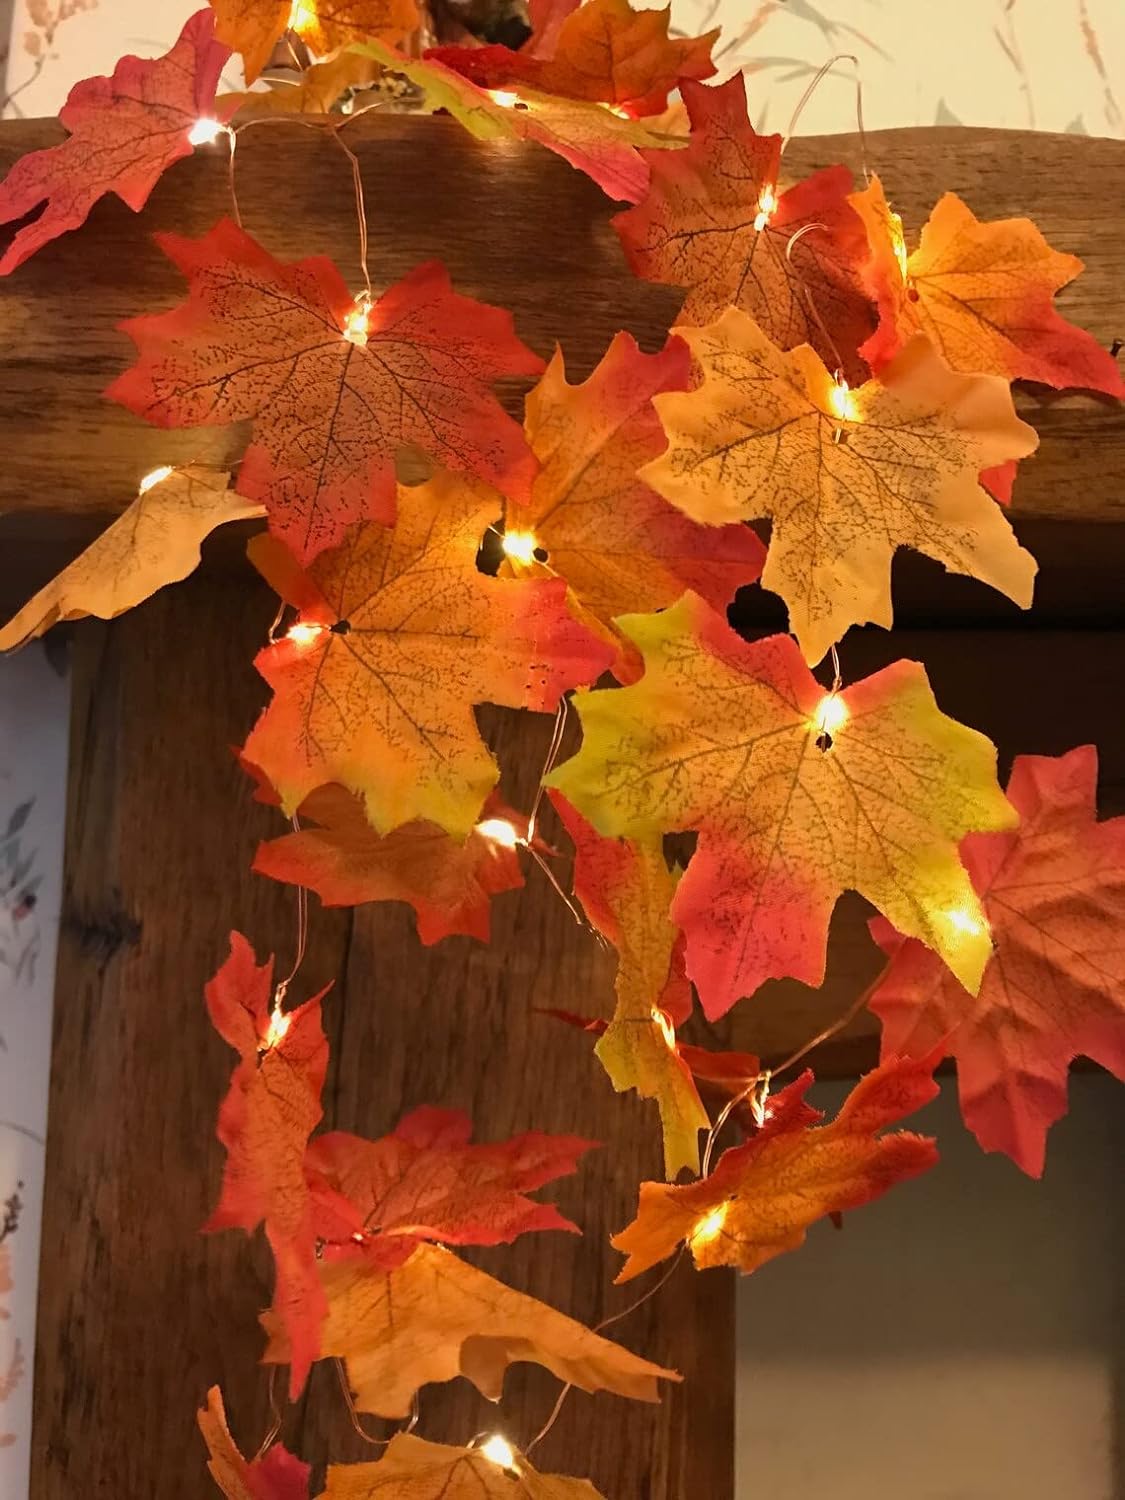 Colorful autumn leaves strung together with twinkling lights for a warm touch.